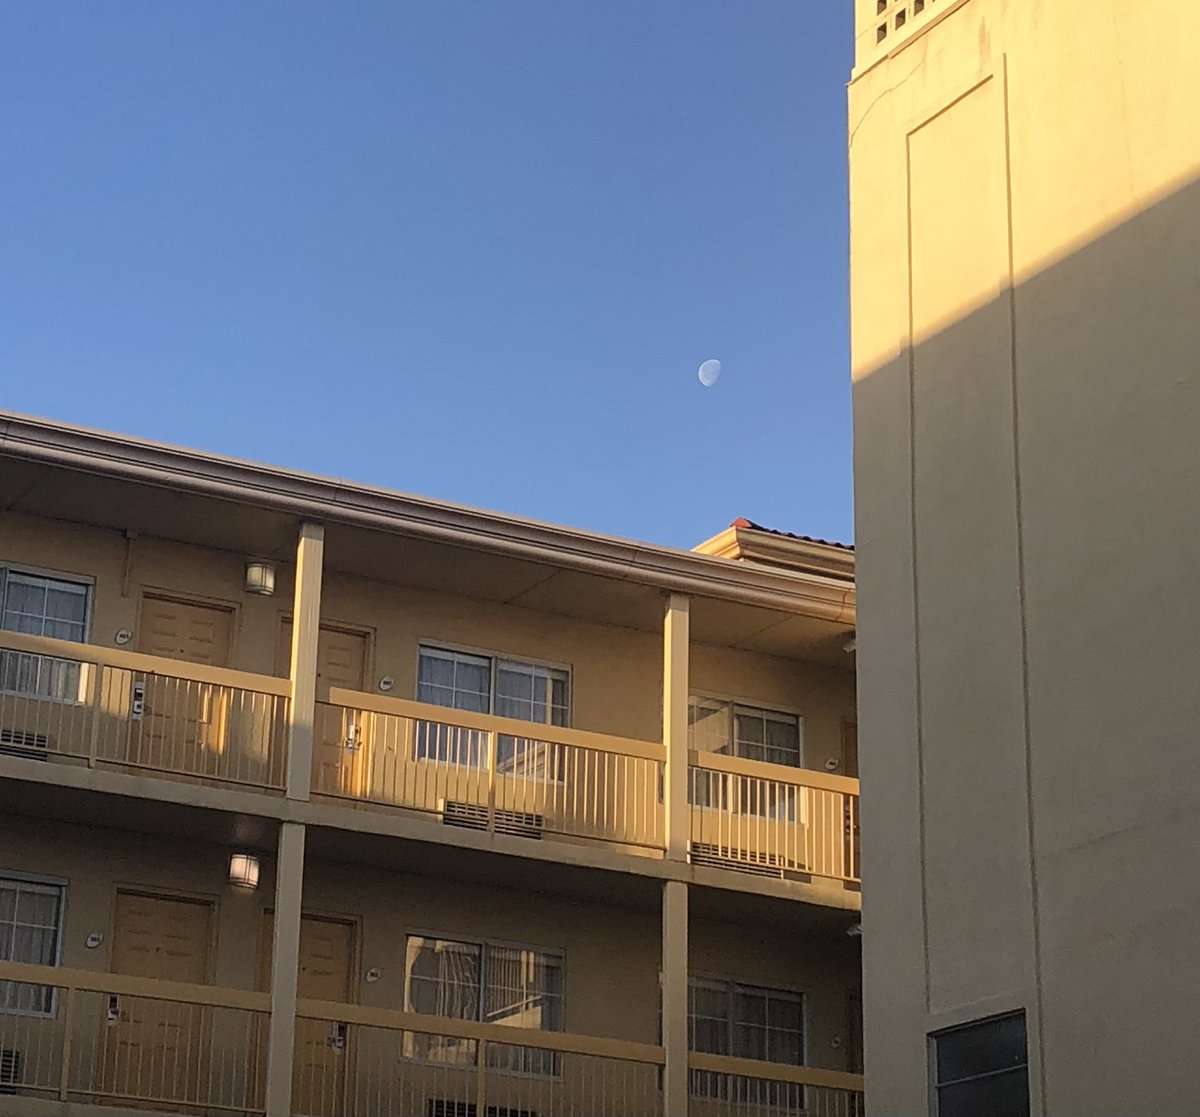 Good morning #SXSW23! Did you see that gorgeous Moon this morning?! Come learn more about NASA’s plans to return humans to that amazing little world at our #ArtemisGeneration panel this afternoon!